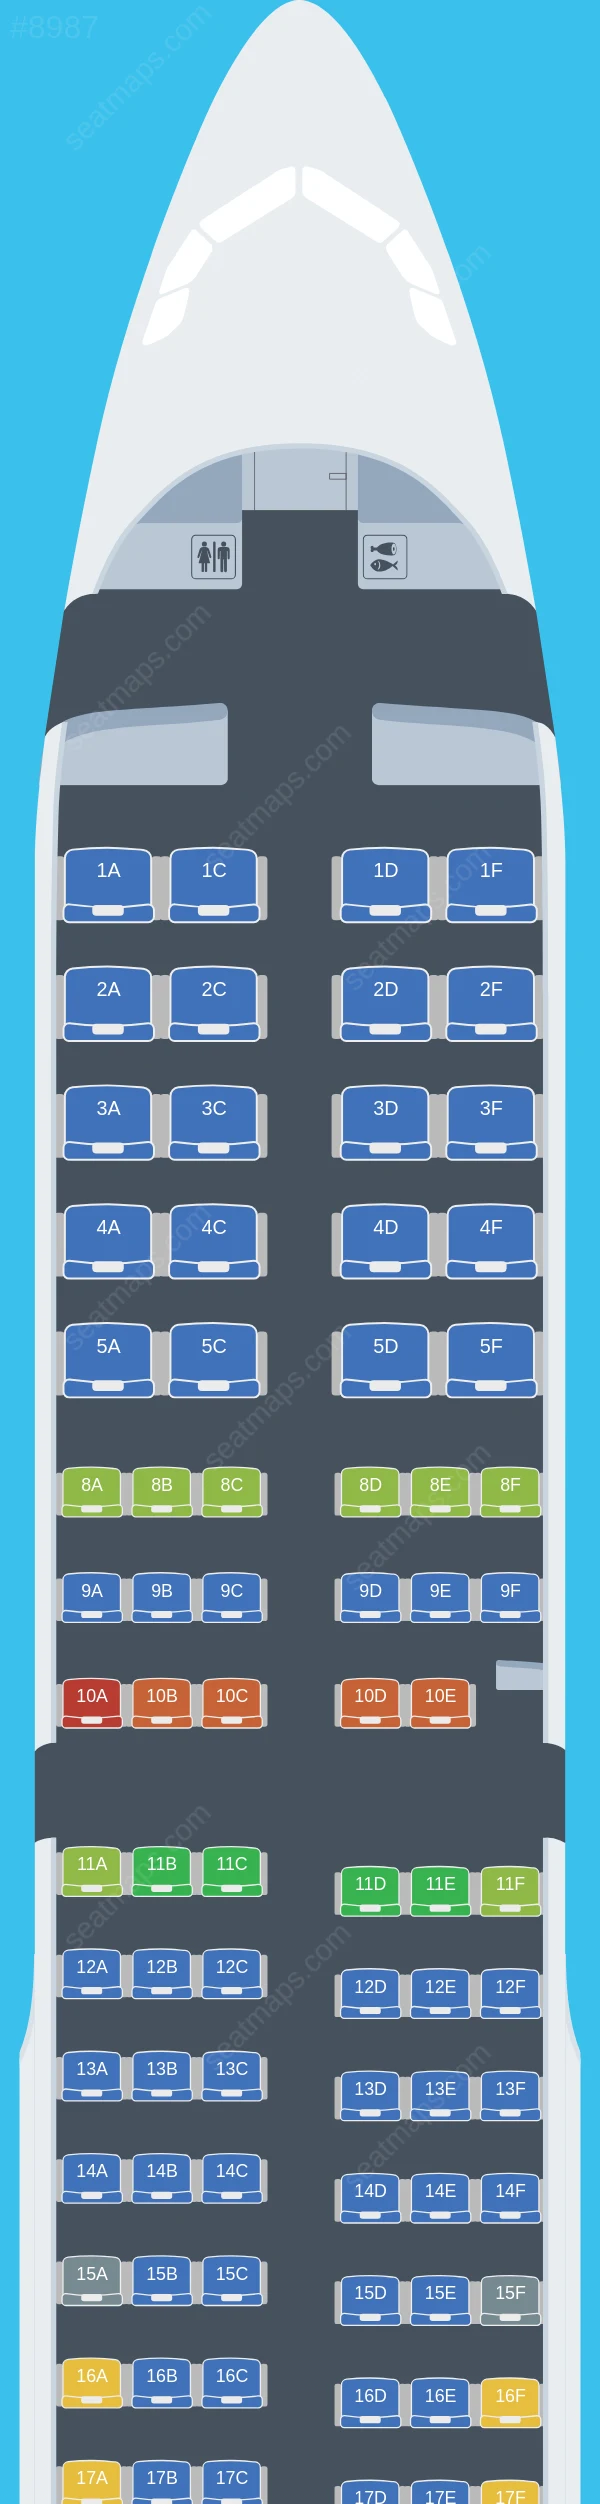 American Airlines Airbus A321-200 V.1 seatmap preview